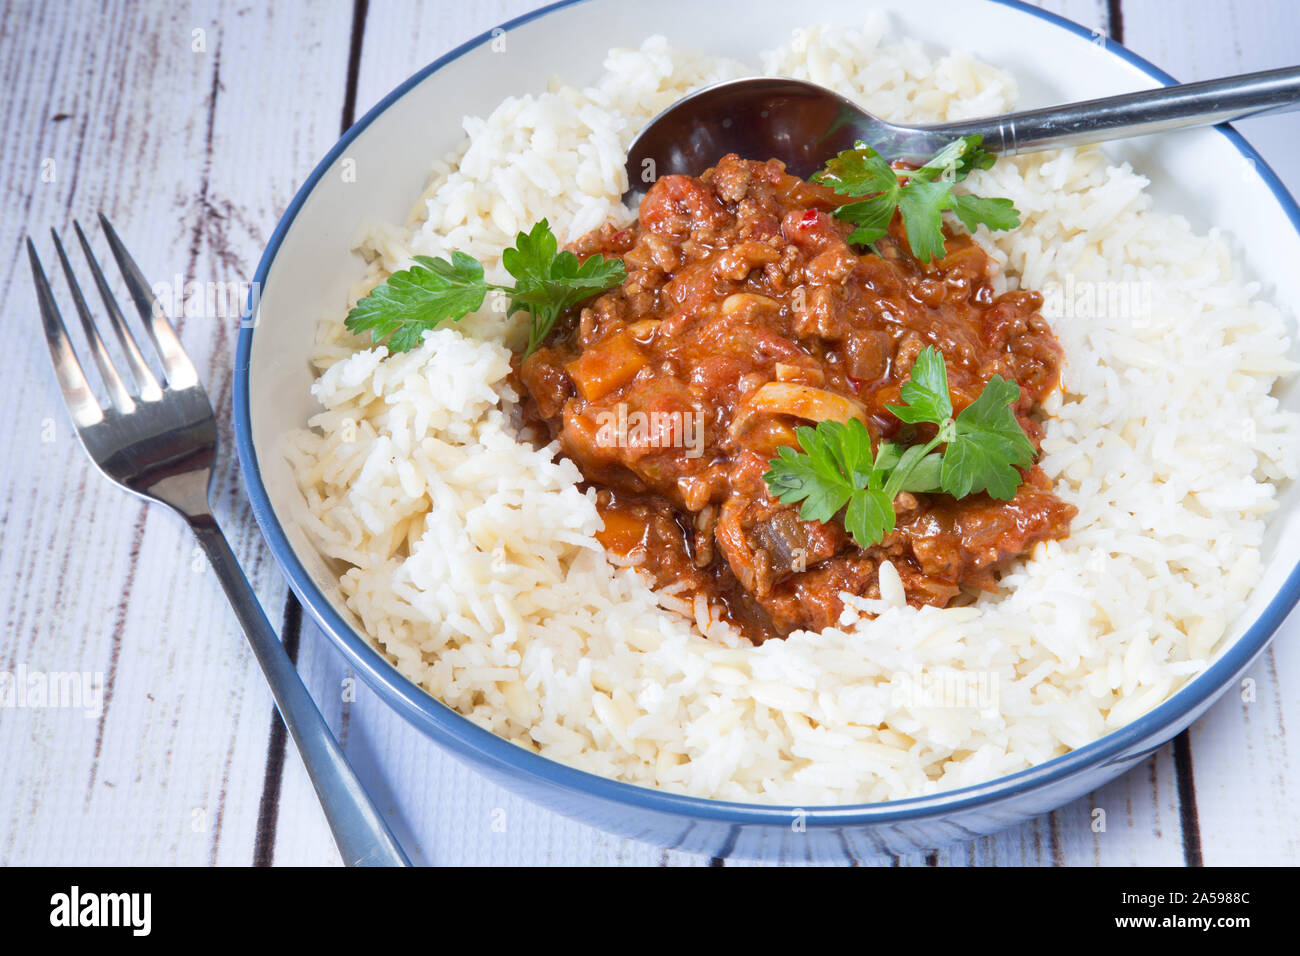 Quorn chili with rice and orzo pilaf Stock Photo